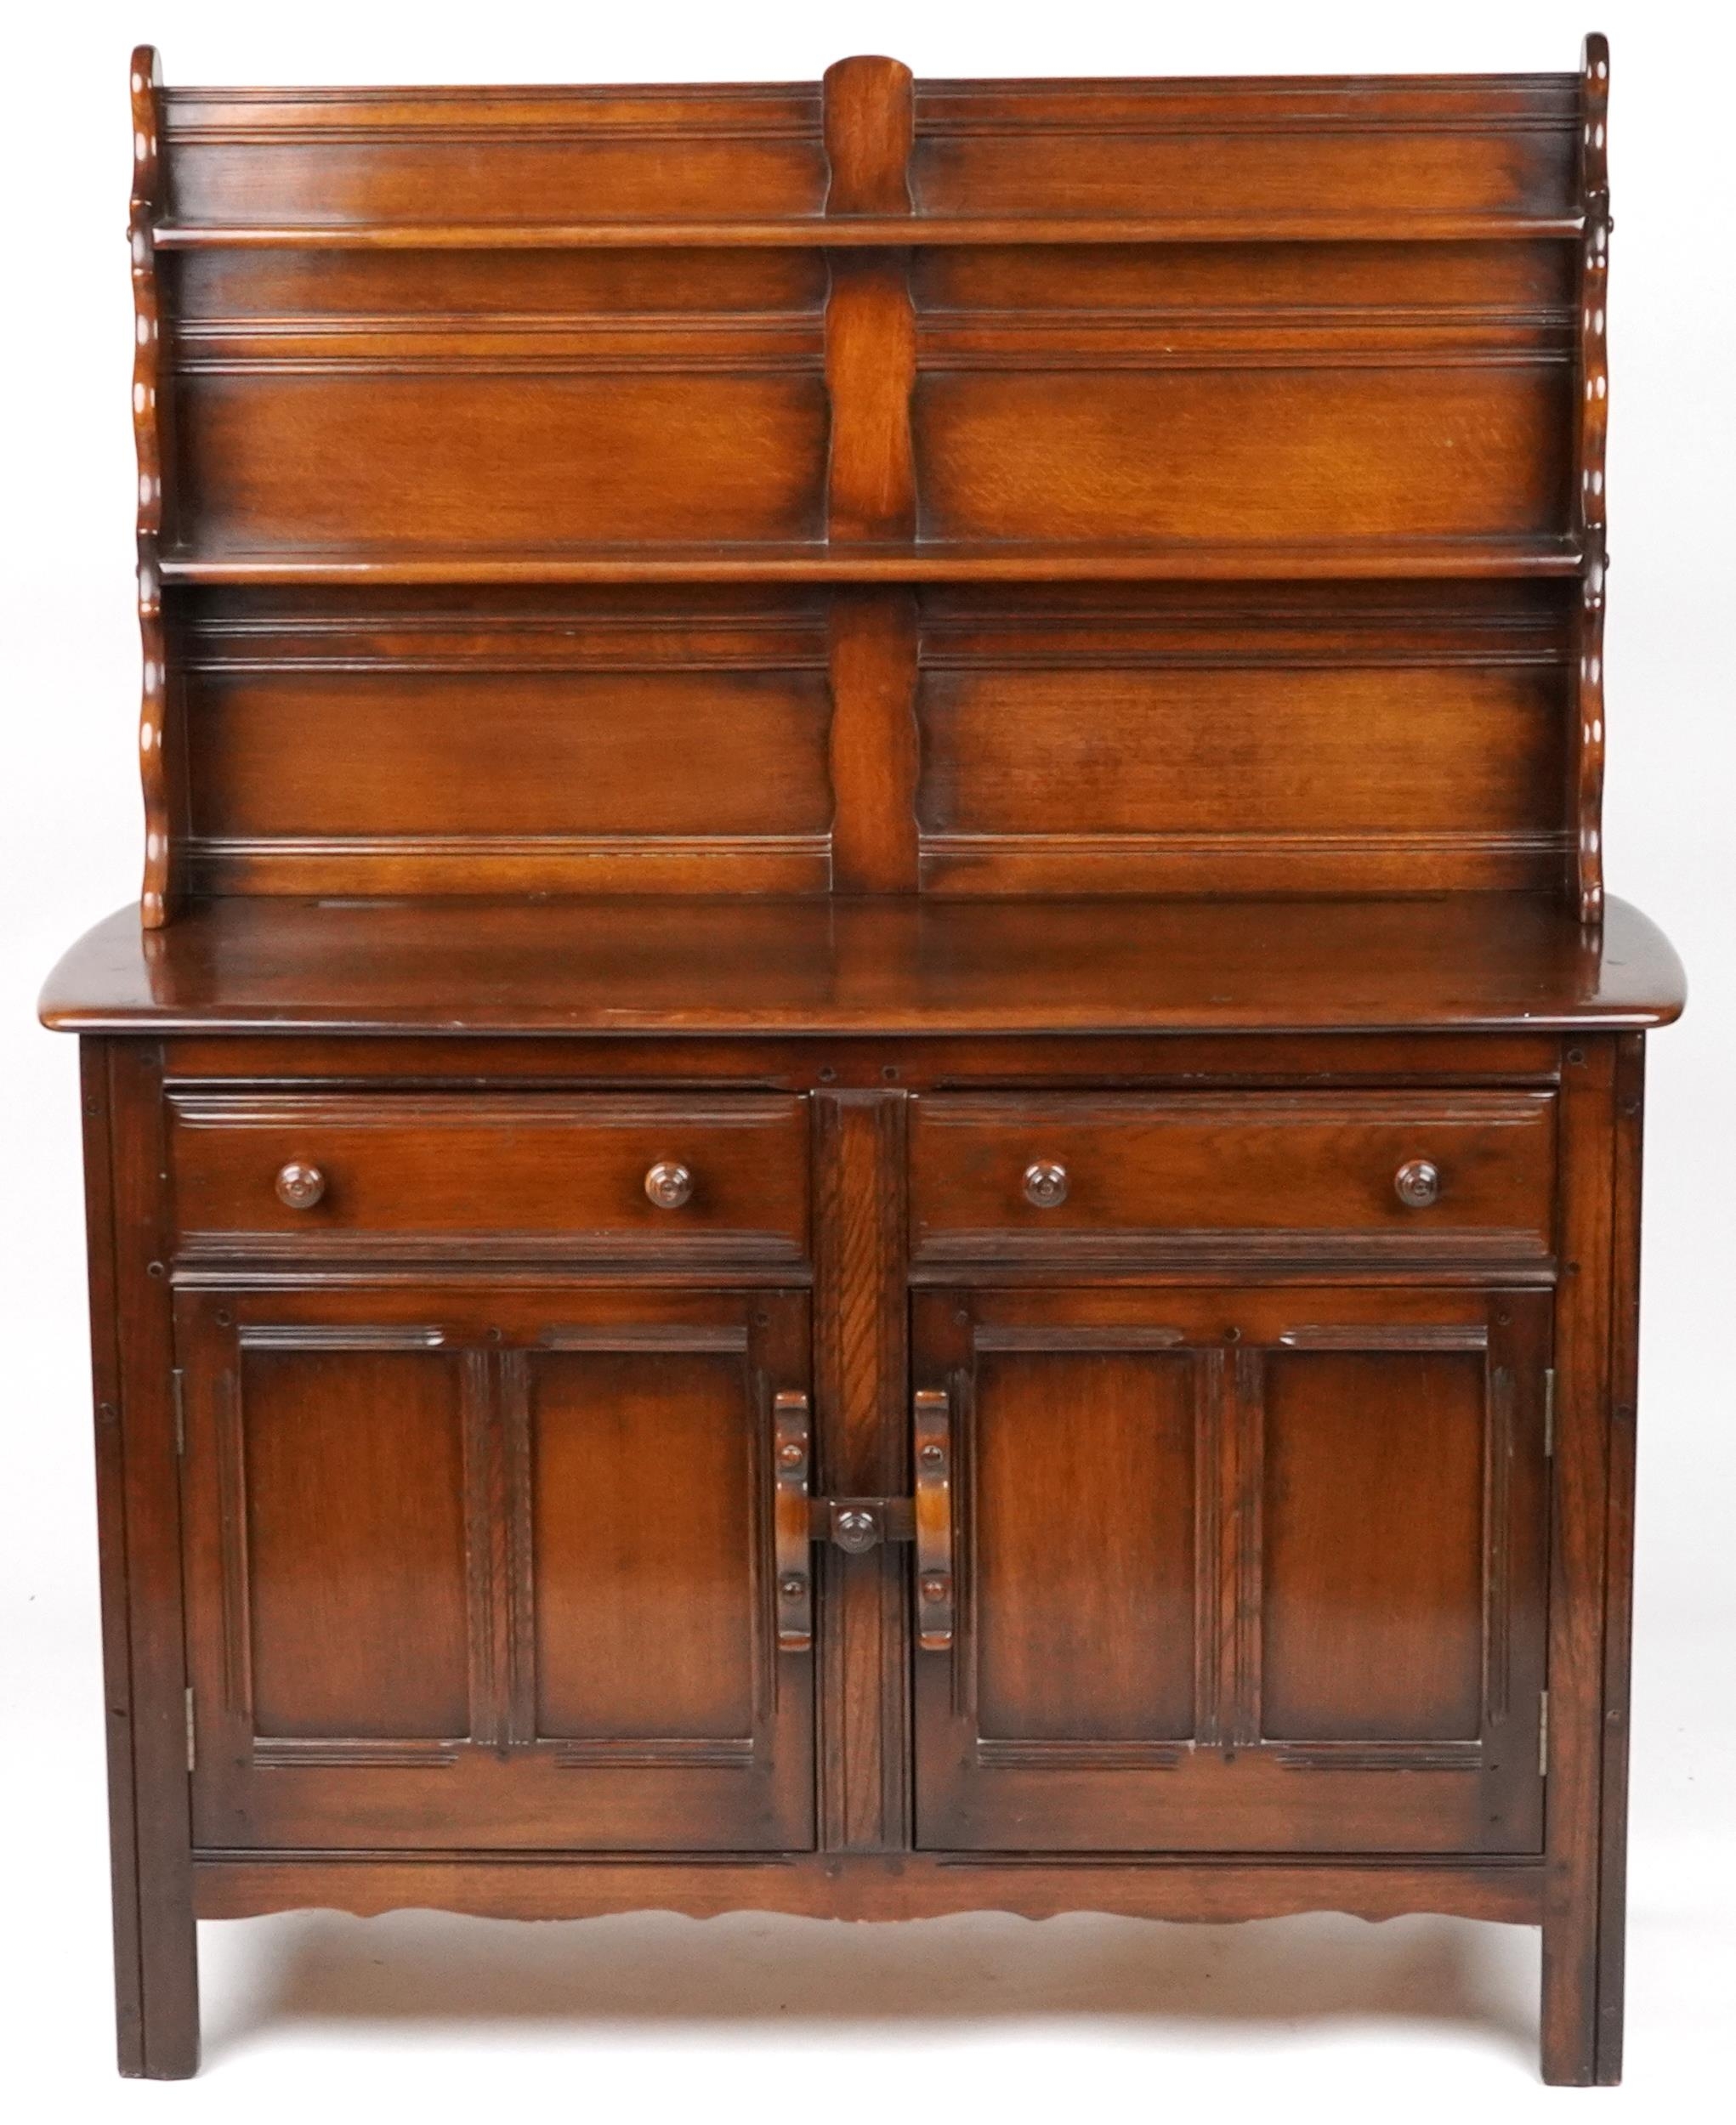 Ercol elm dresser with open plate rack above a pair of drawers and pair of cupboard doors, 154cm H x - Image 2 of 4